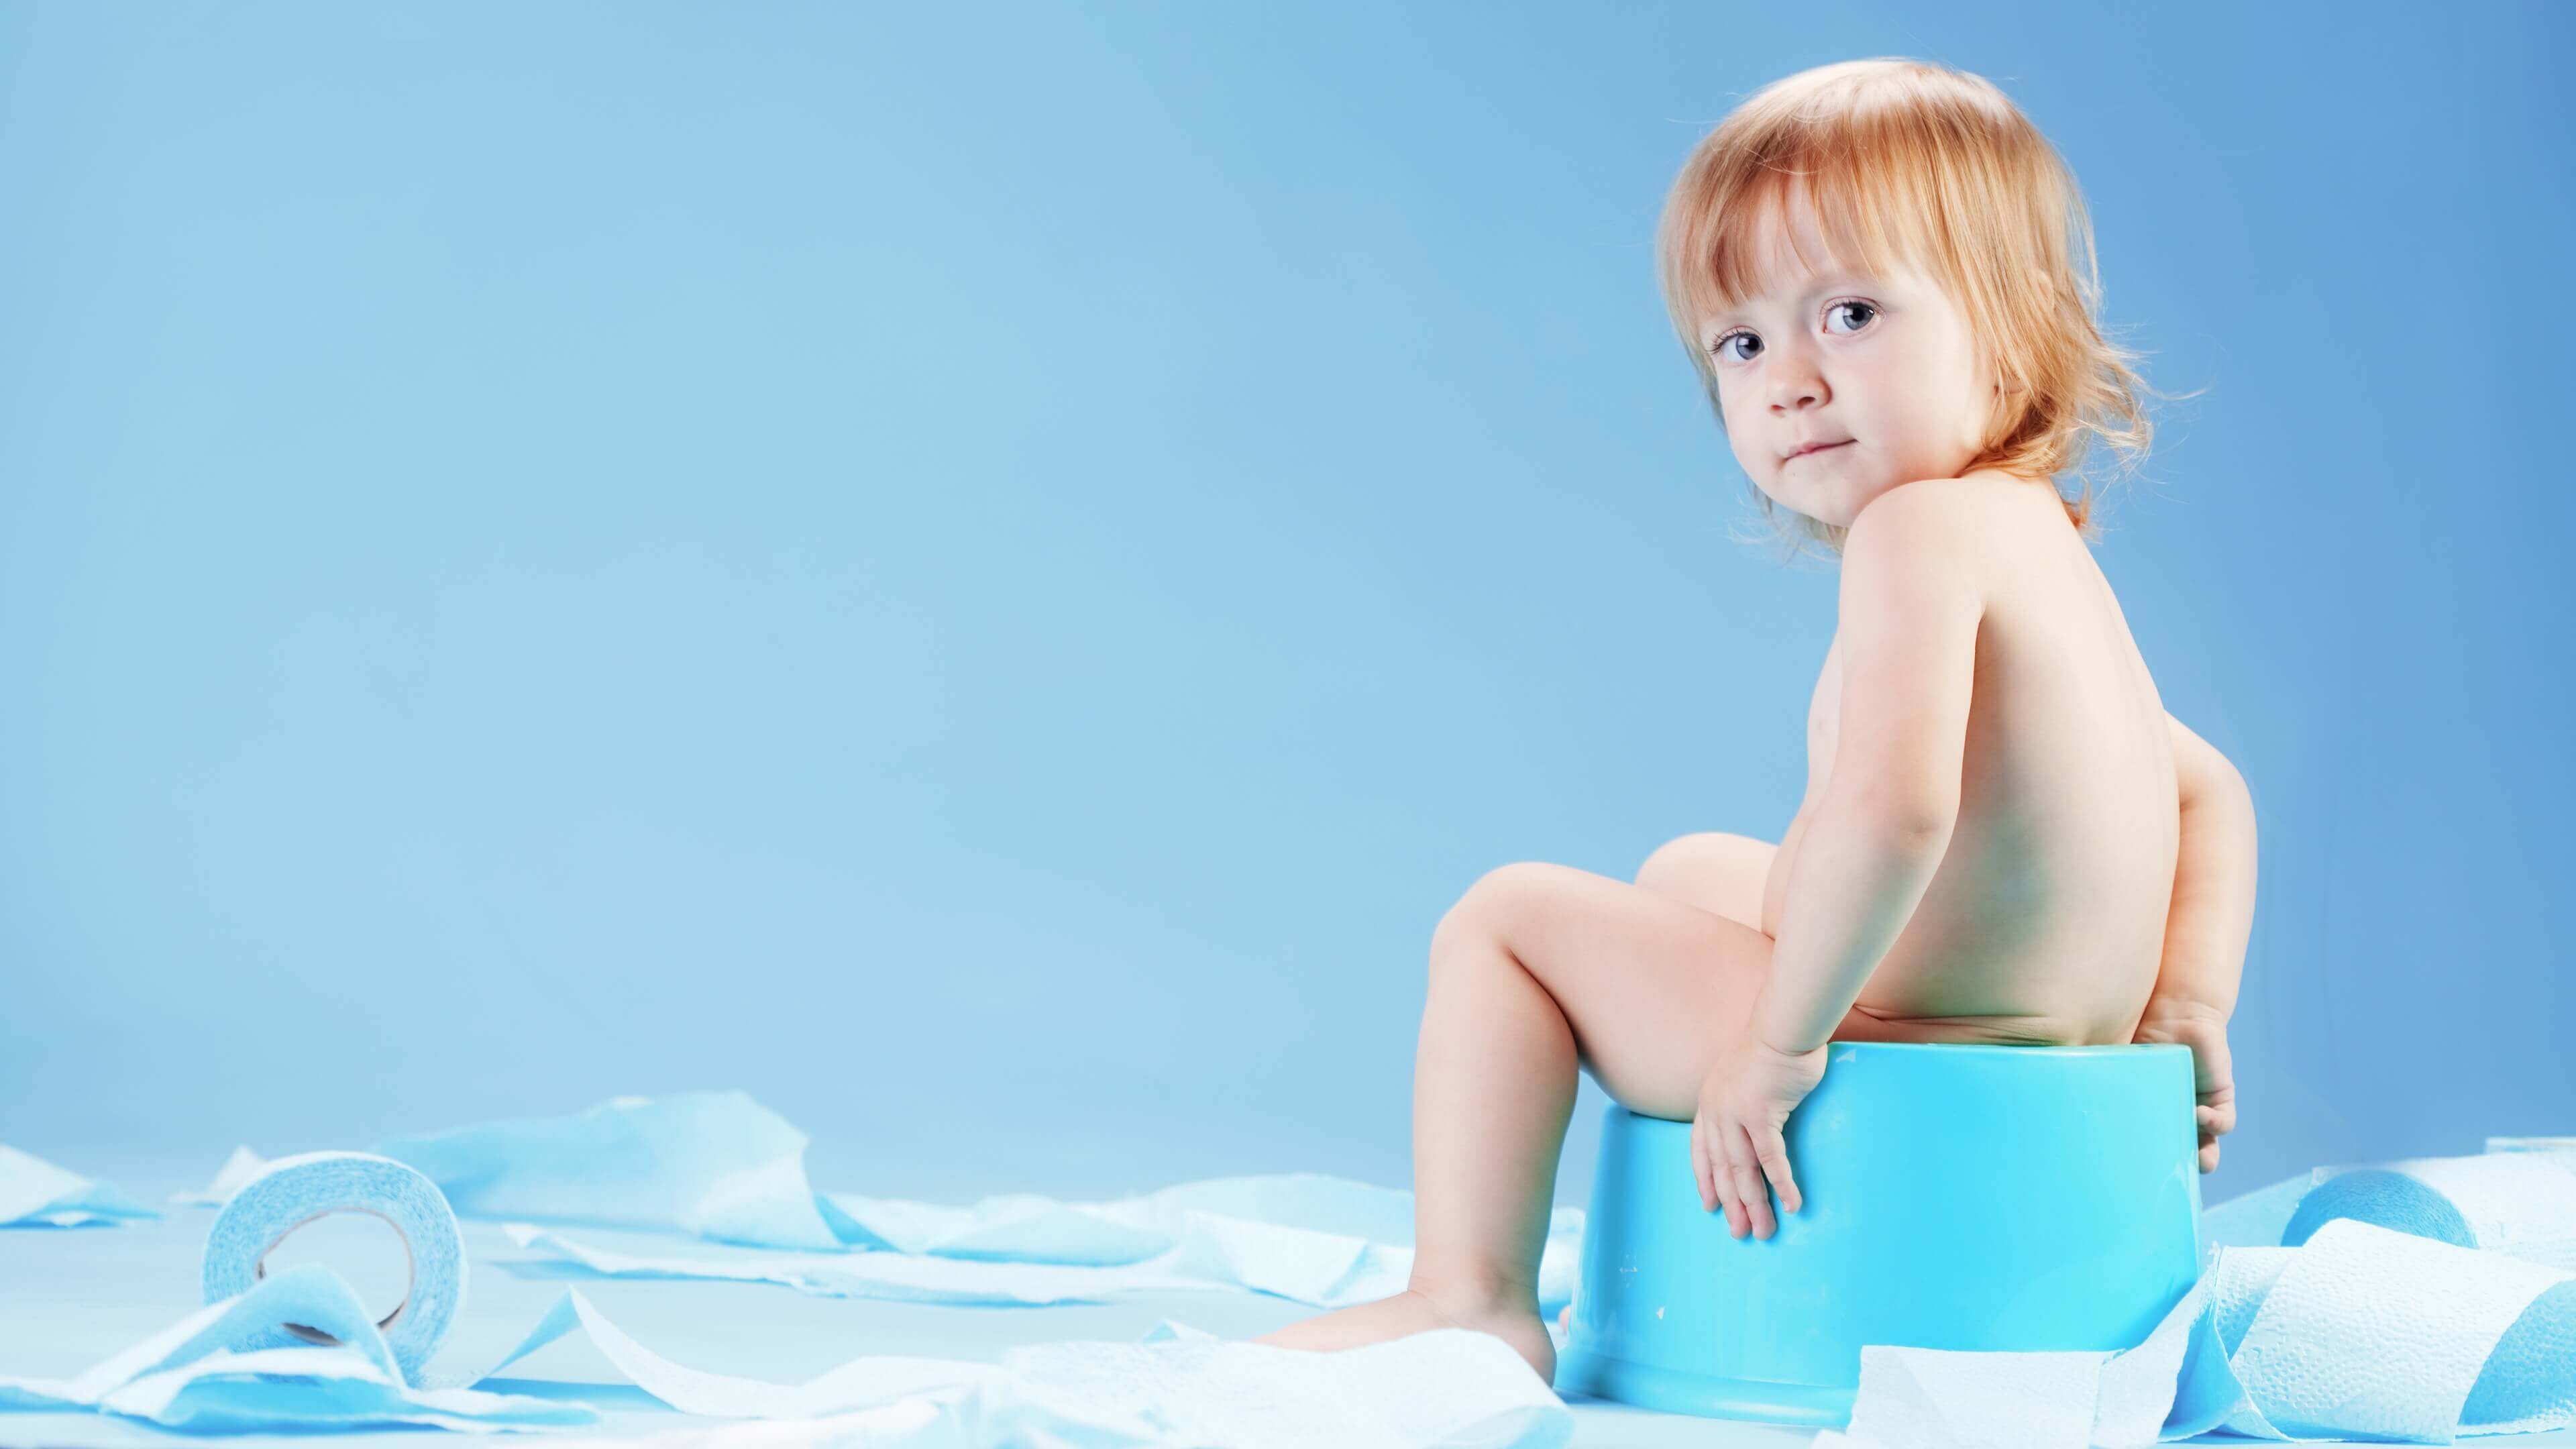 10 Tips for 3-Day Potty Training Success (It's Totally Possible!)